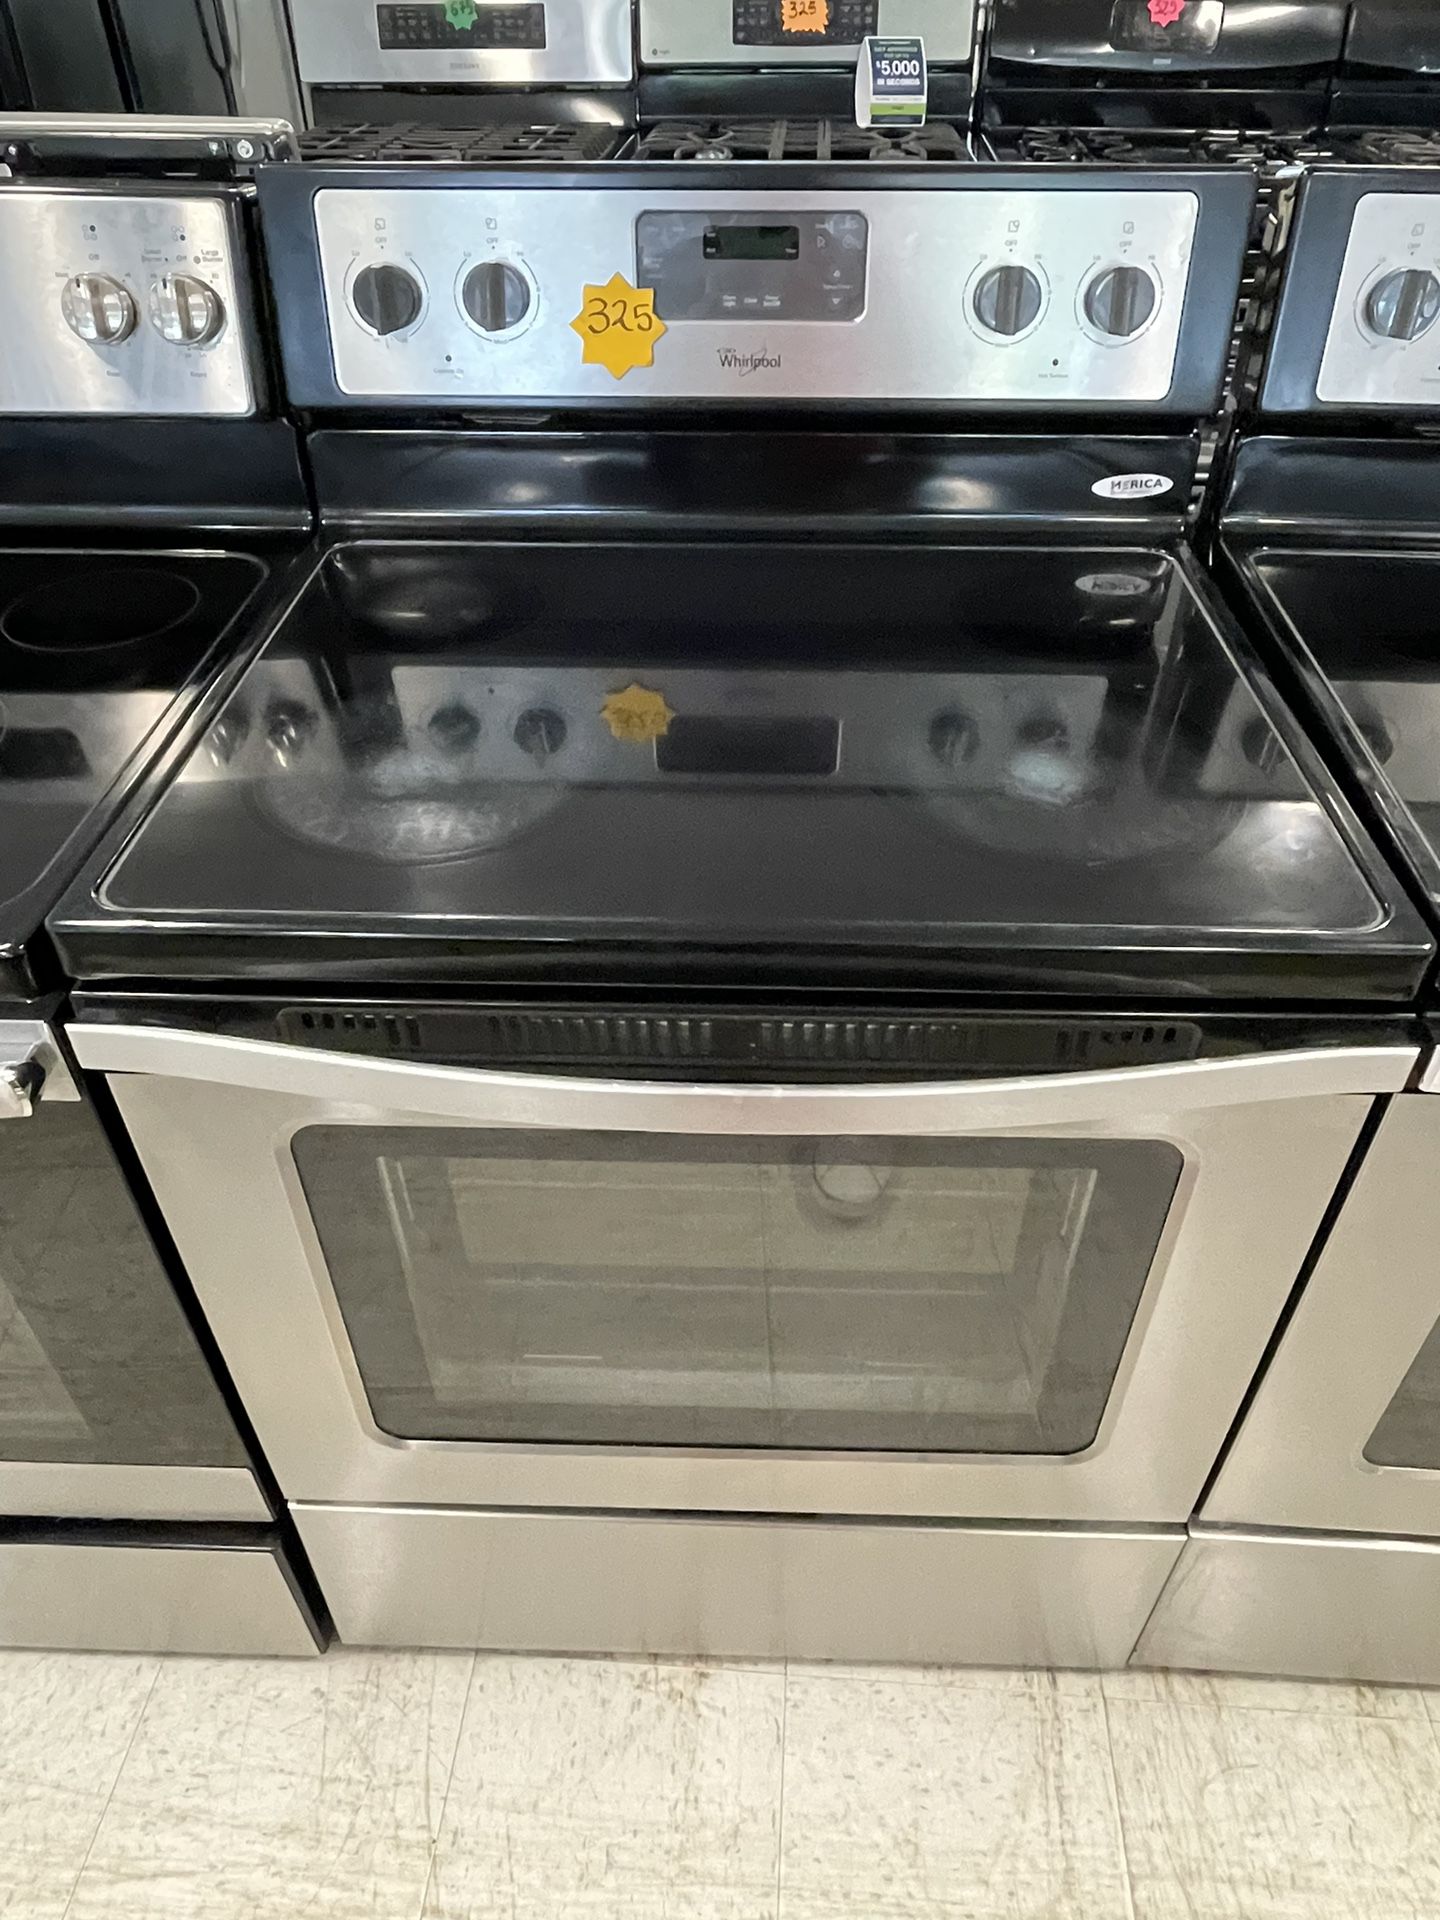 Whirlpool Electric Stove Used In Good Condition With 90days Warranty 